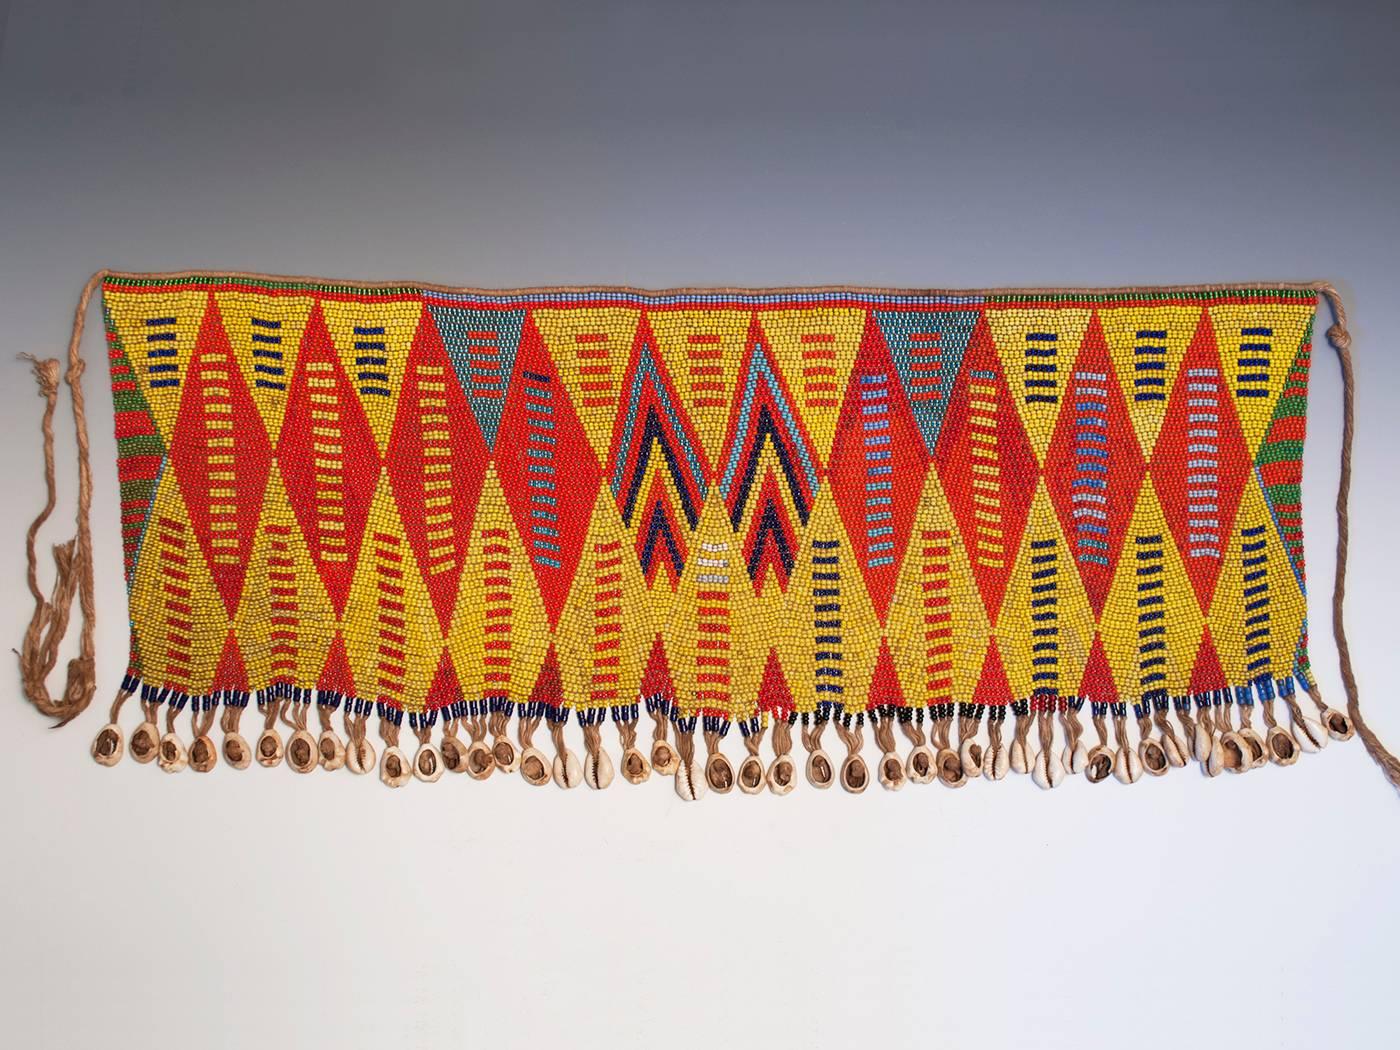 Offered by Zena Kruzick
Mid-20th century tribal beaded cache-sexe modesty apron, Bana Guili people, Mandara Mountains, Cameroon, Africa.

These colorful cache-sex (pikuran) were worn for celebrations, rituals and rites of passage by women who had